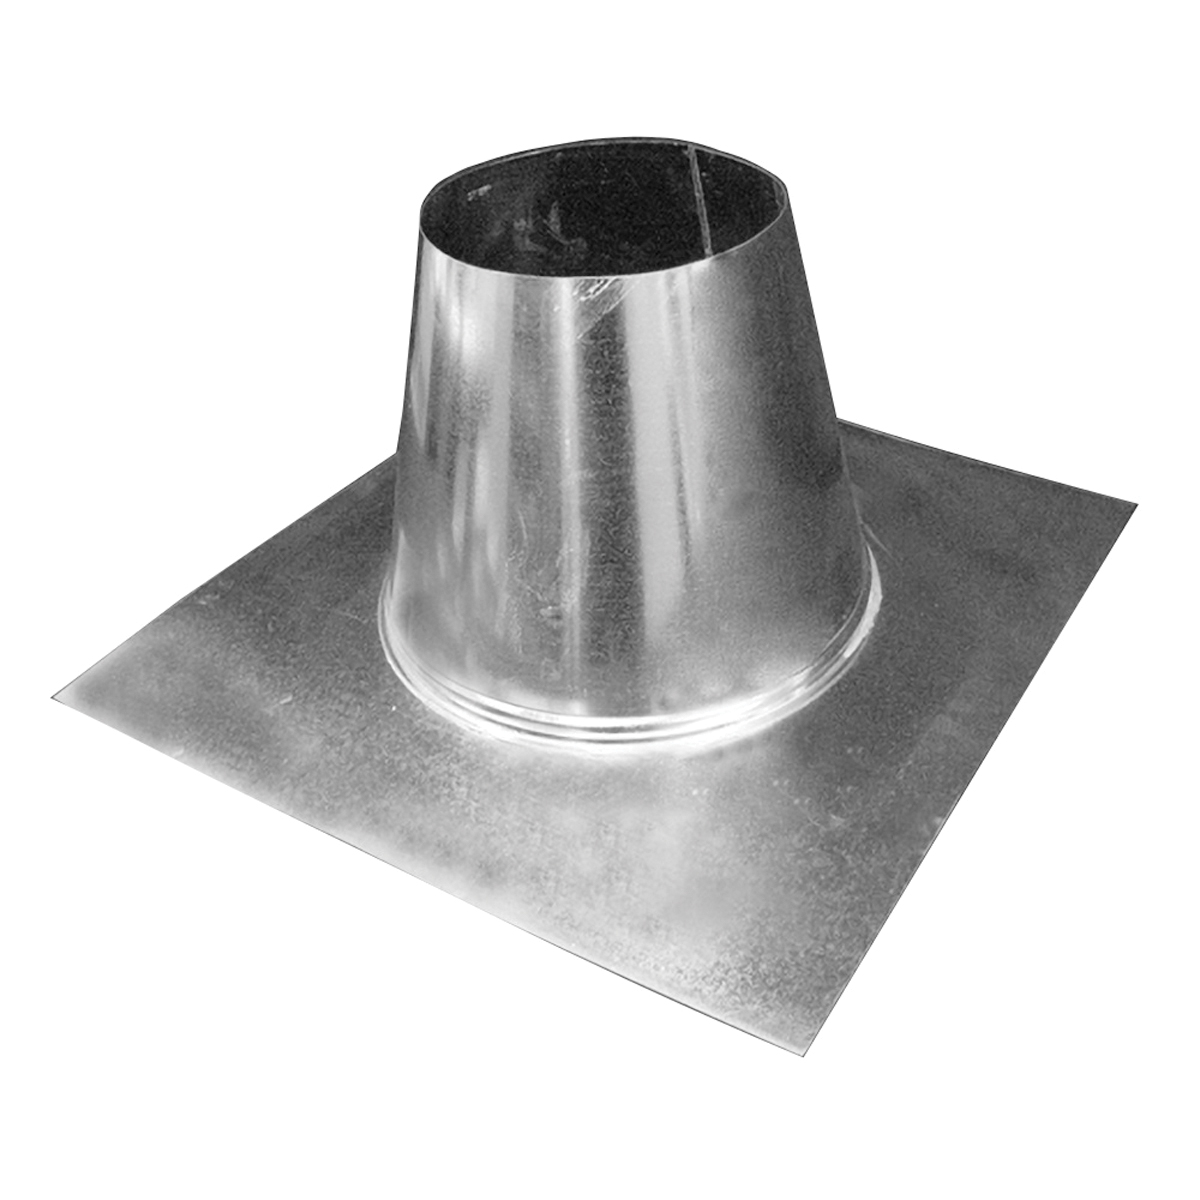 ECCO Manufacturing™ 200409 Flat Gas Vent Flashing, 4 in, Steel, Galvanized